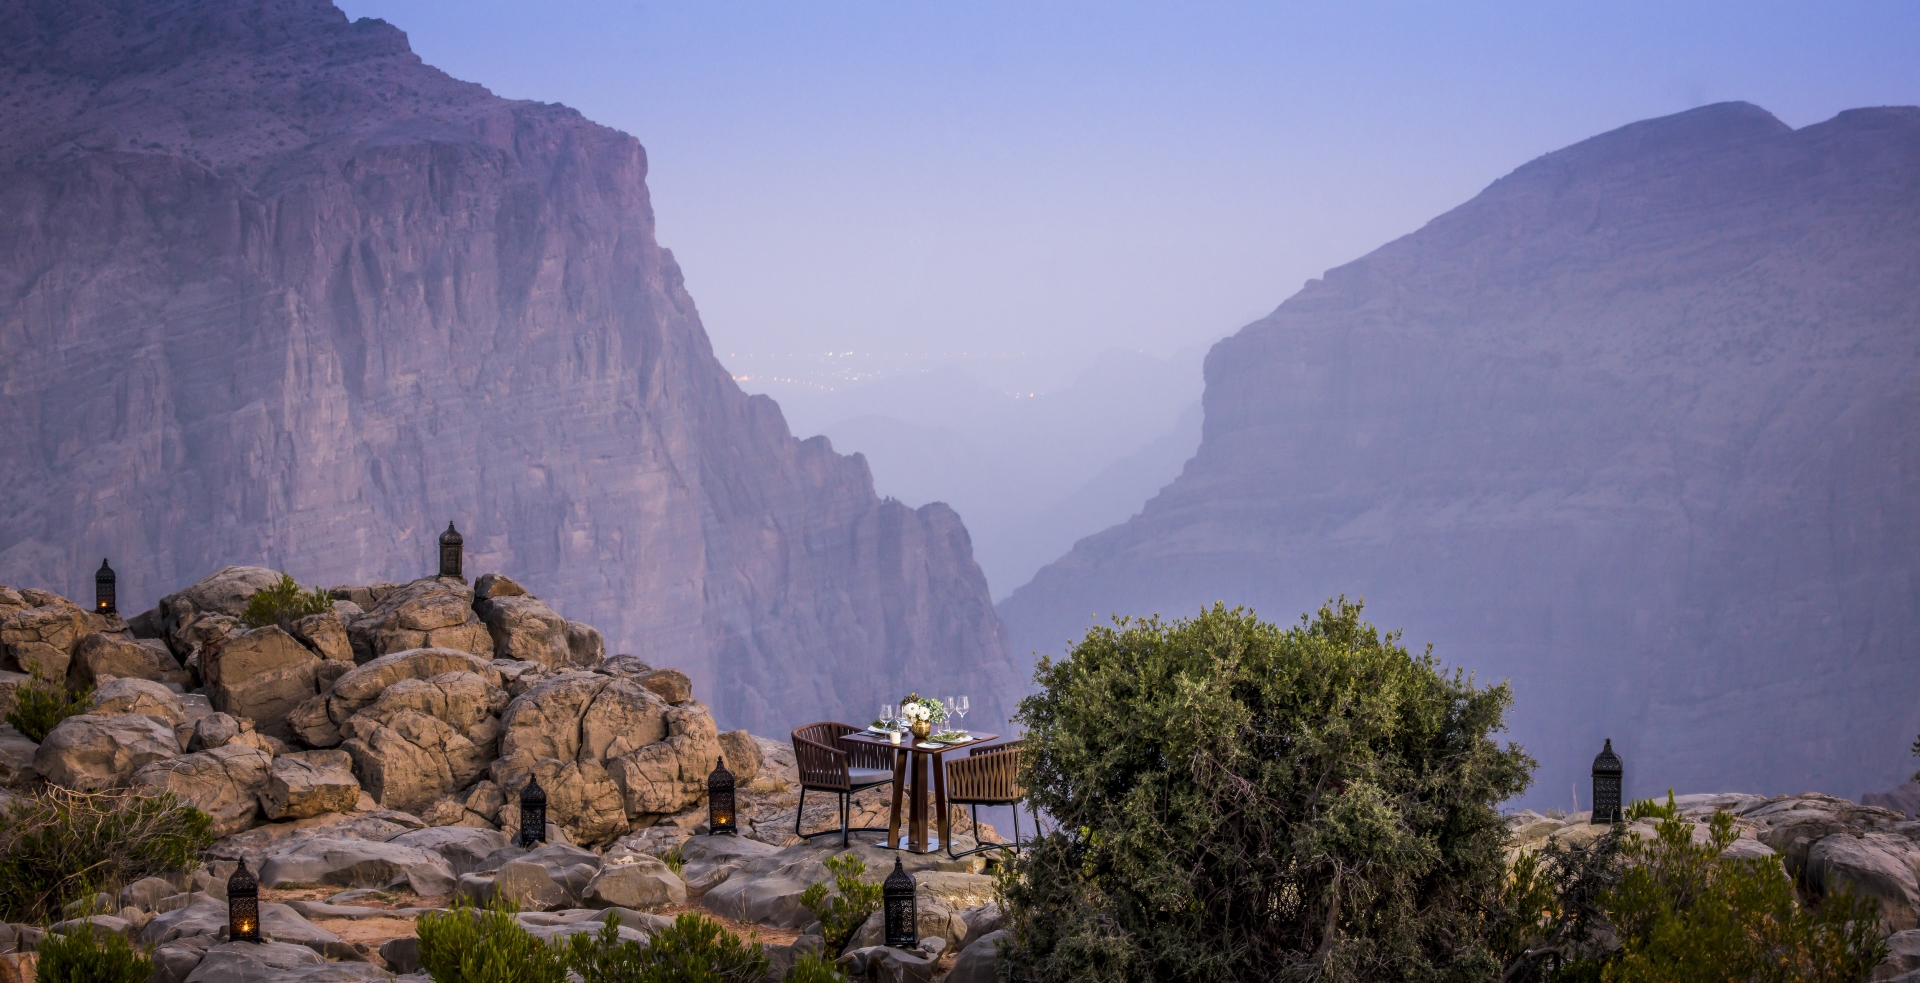 Private dining in Al Hajar Mountains 